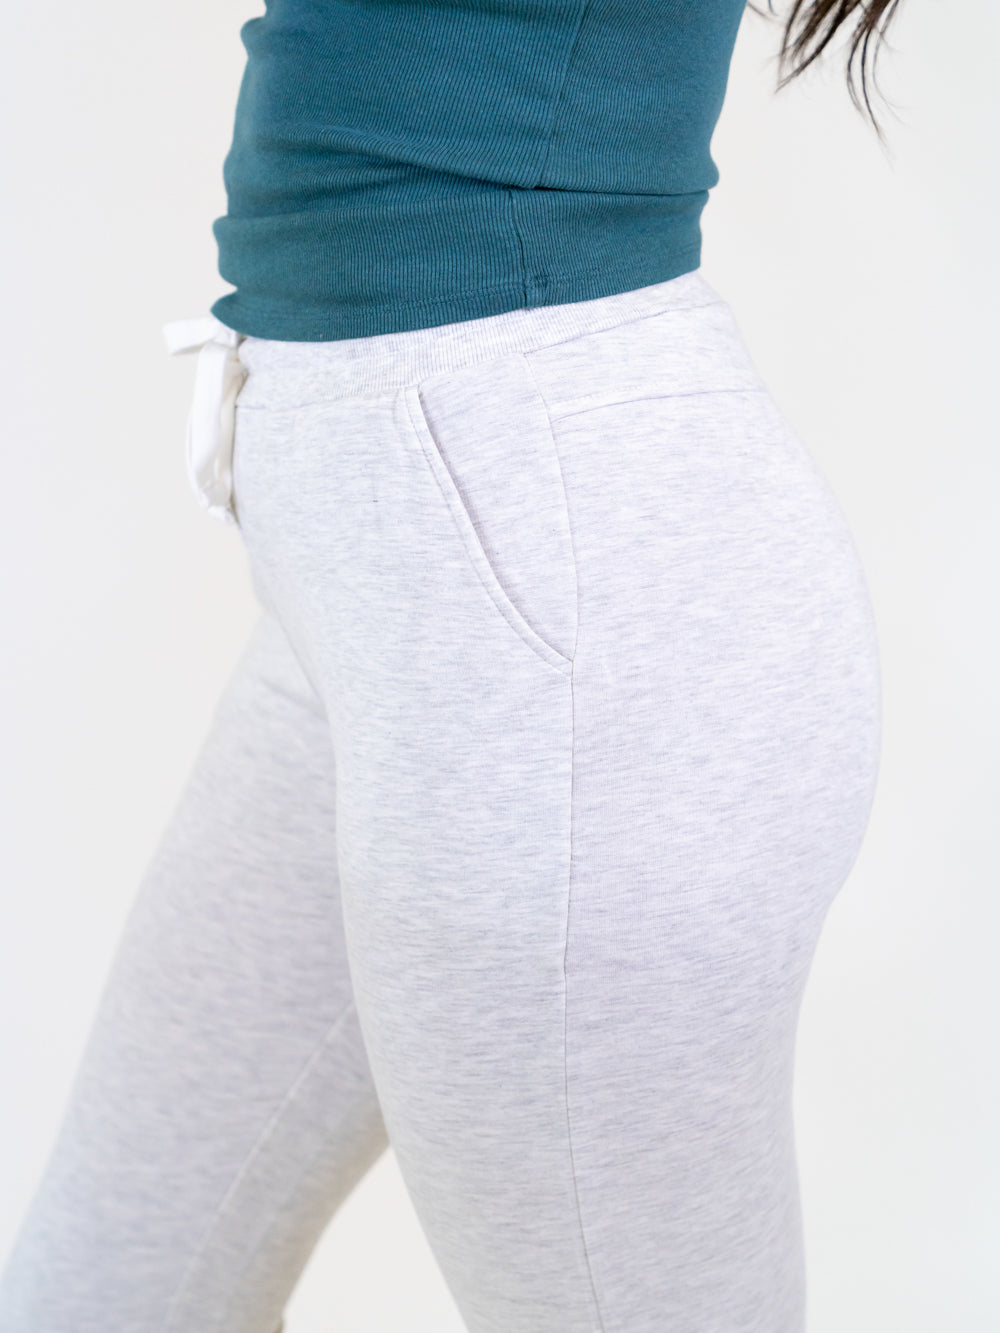 tall joggers for women - natural oat color